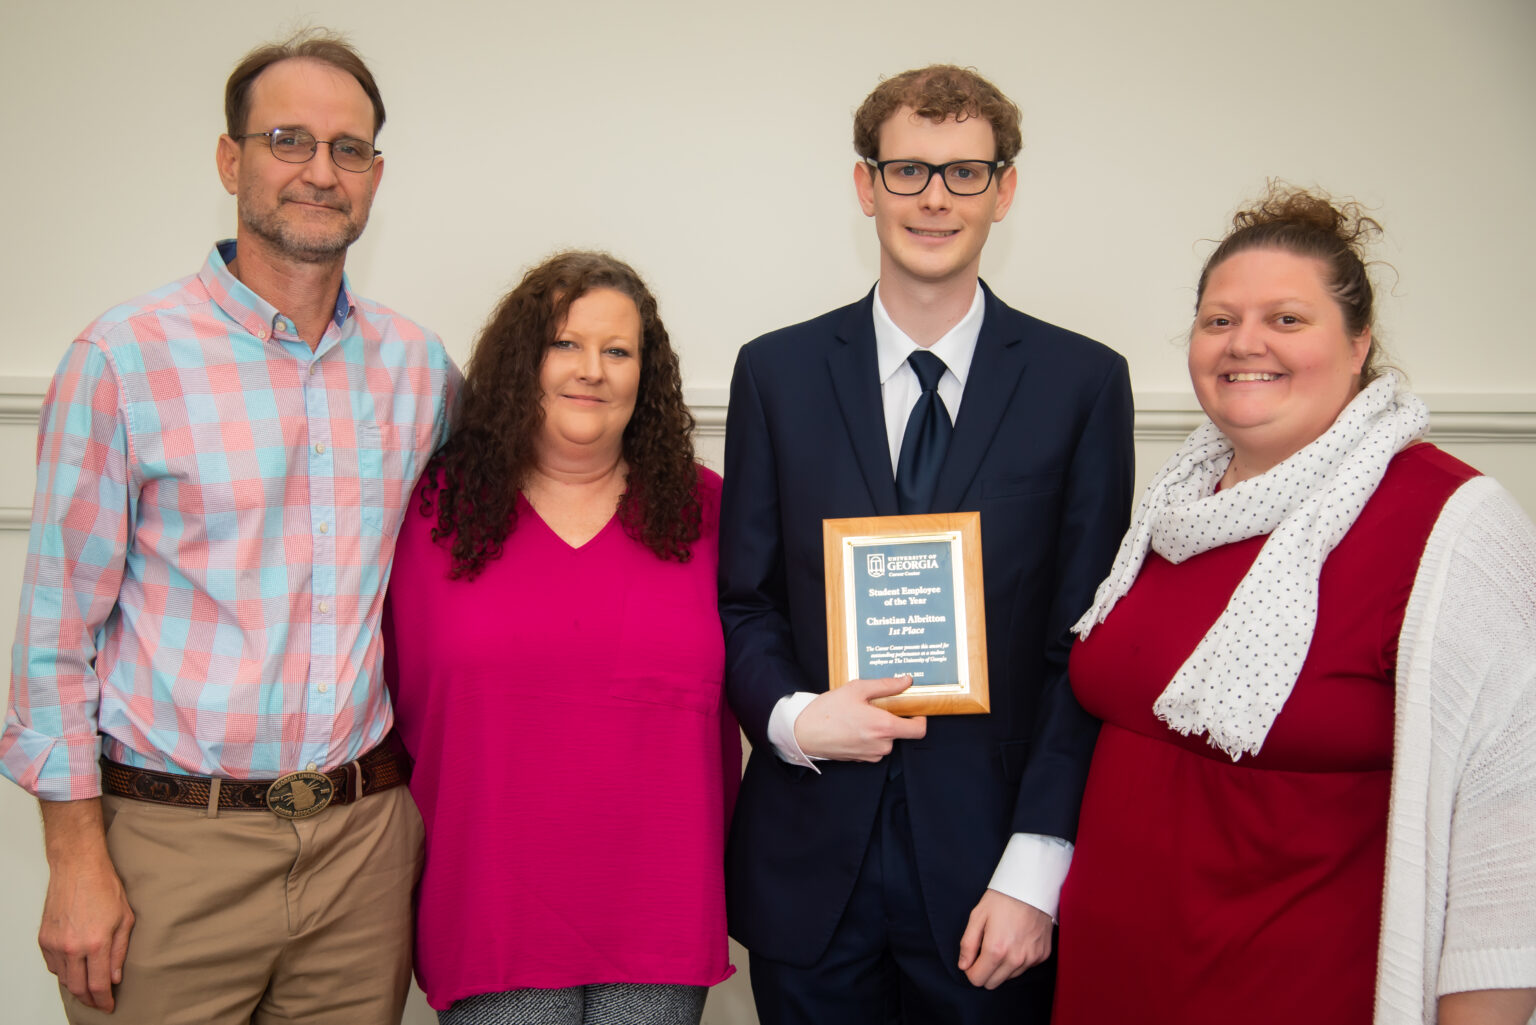 Christian Albritton, a third-year avian biology and biological science double major from Butler, Georgia, was selected as the 2022 Student Employee of the Year thanks to his work with Georgia 4-H.